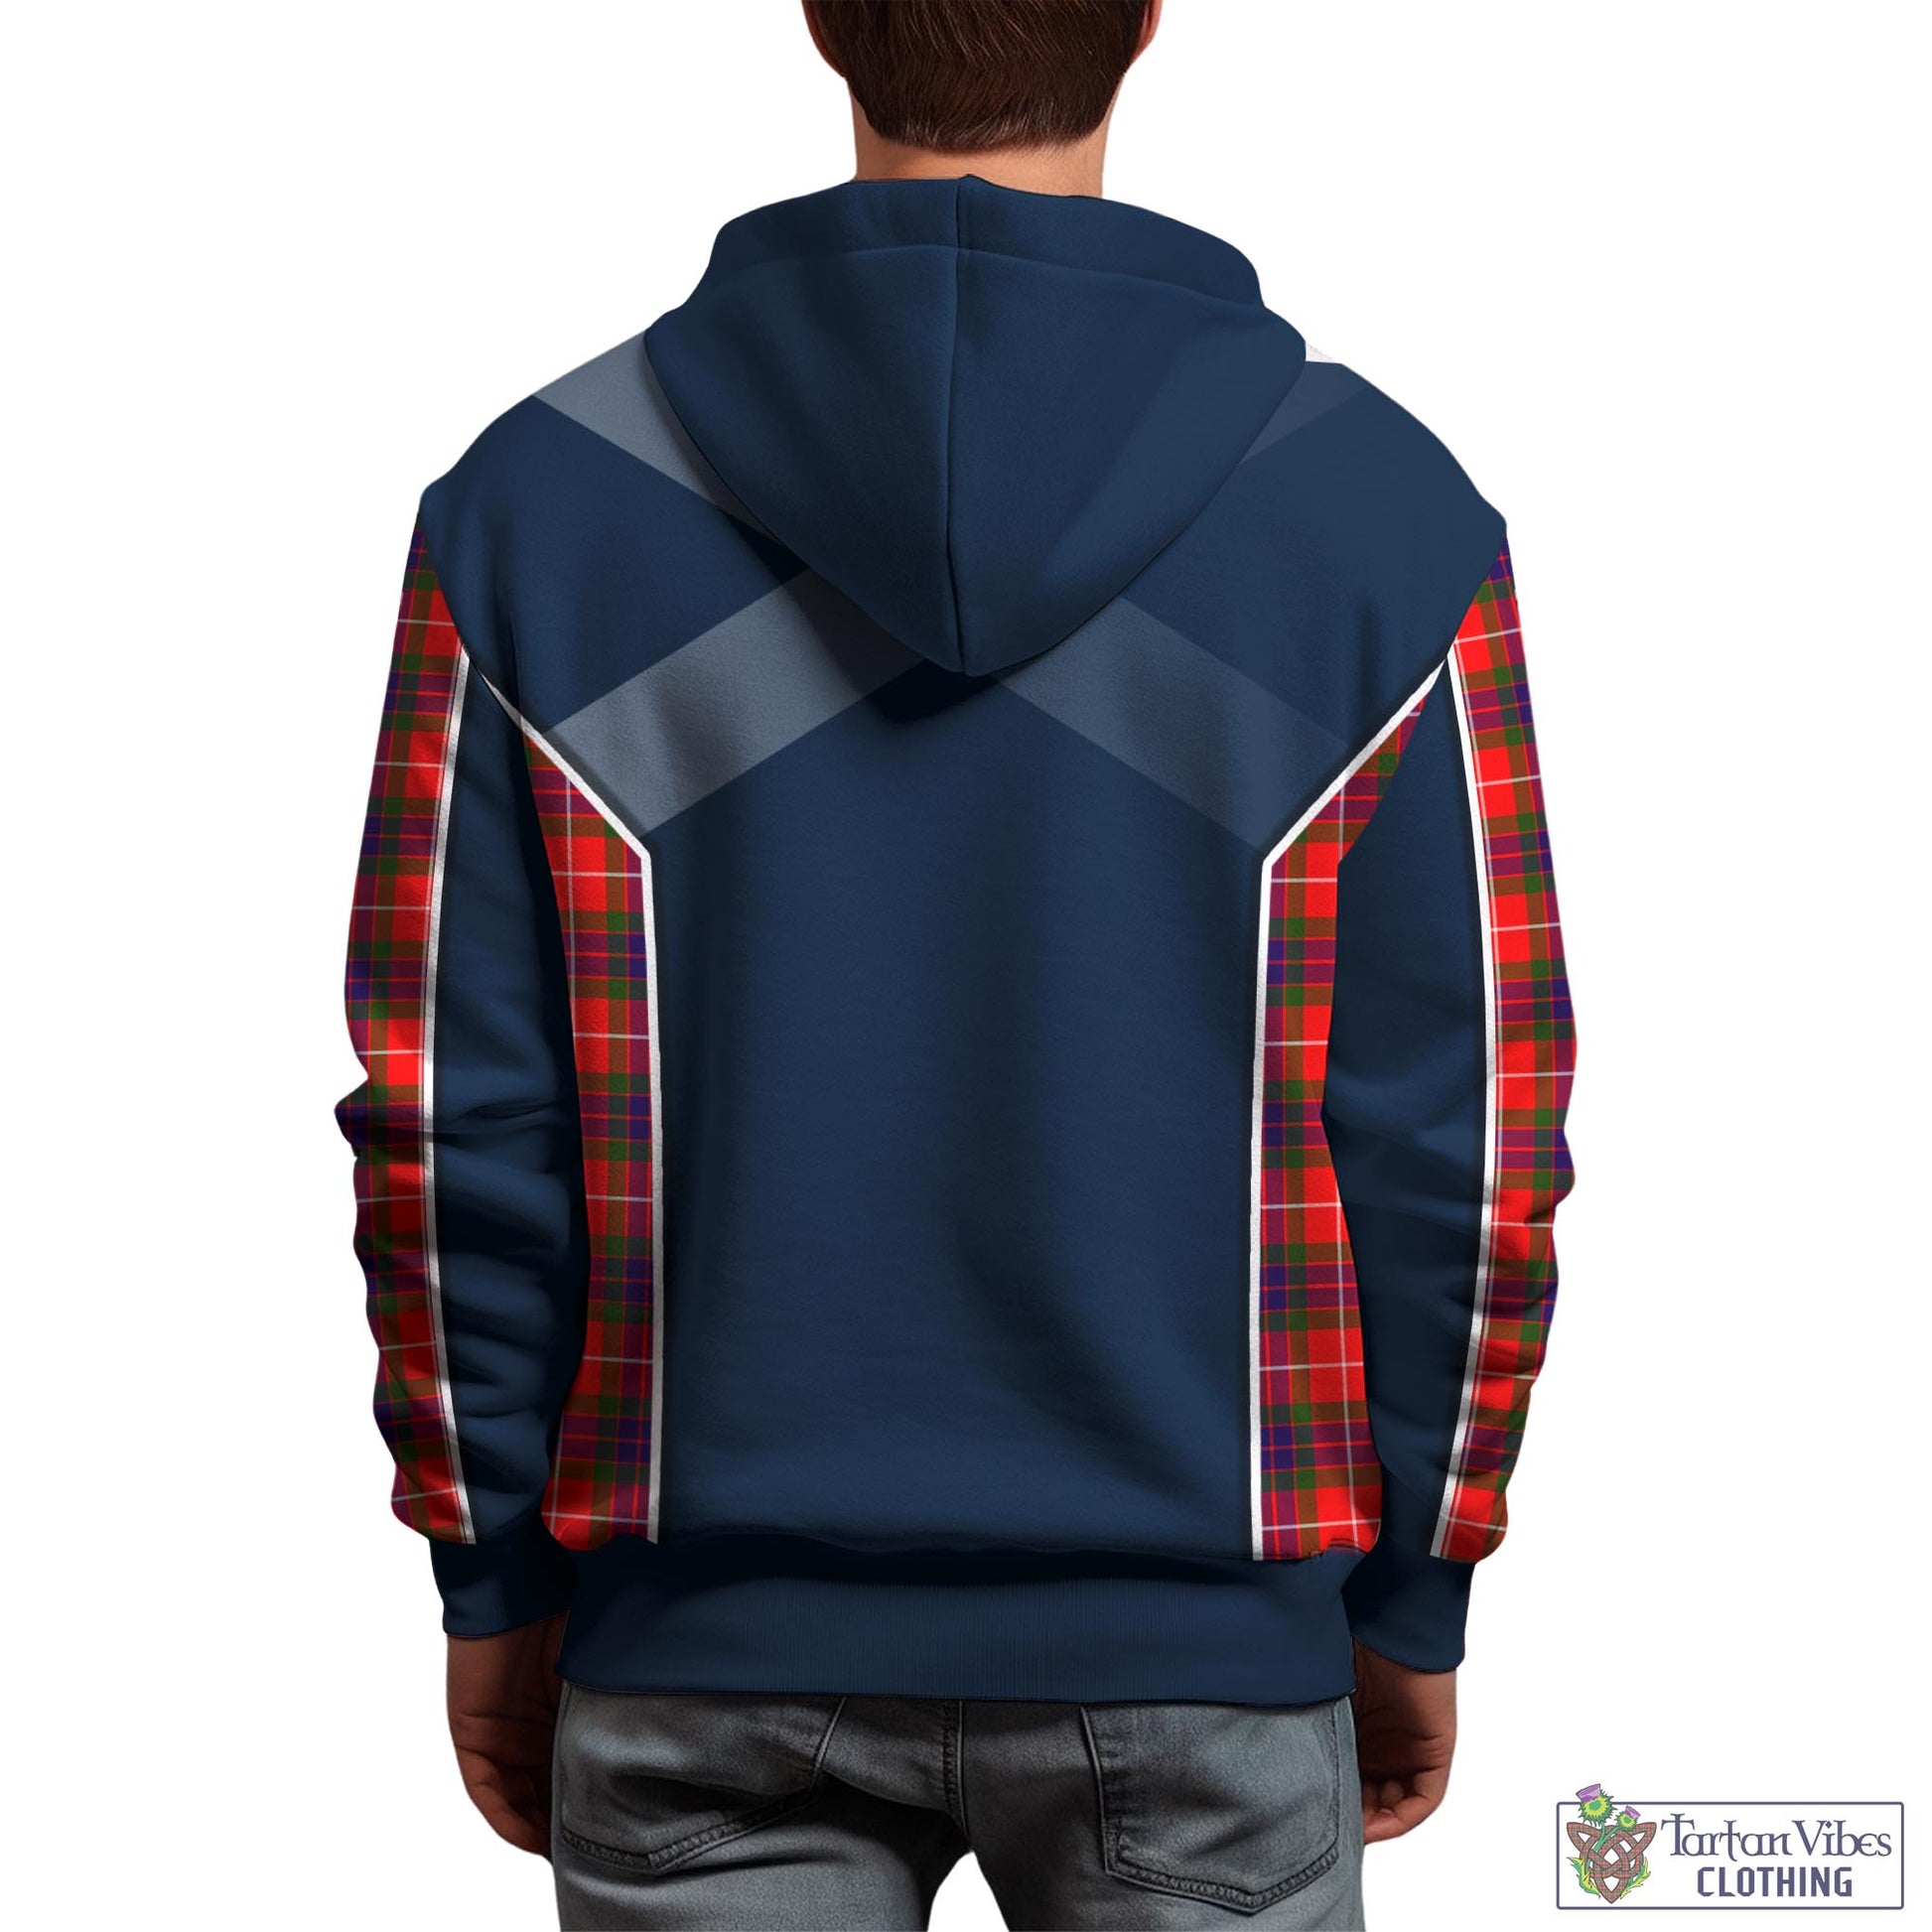 Tartan Vibes Clothing Abernethy Tartan Hoodie with Family Crest and Scottish Thistle Vibes Sport Style